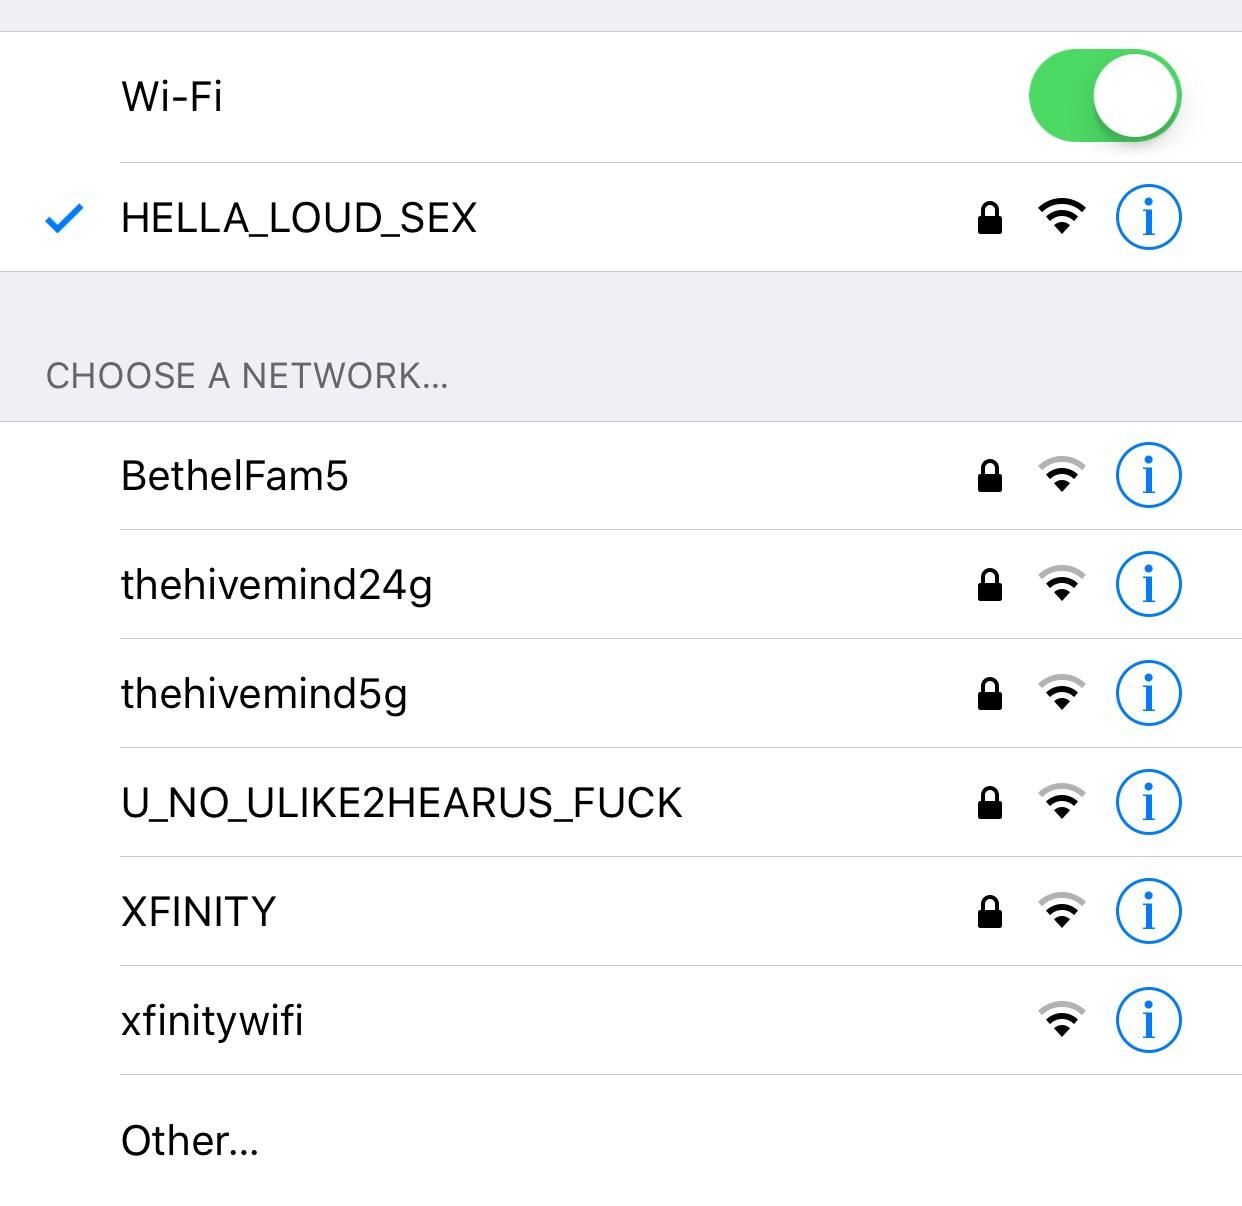 Neighbors have loud sex. Call them out with WiFi network. They respond. Hilarity ensues.